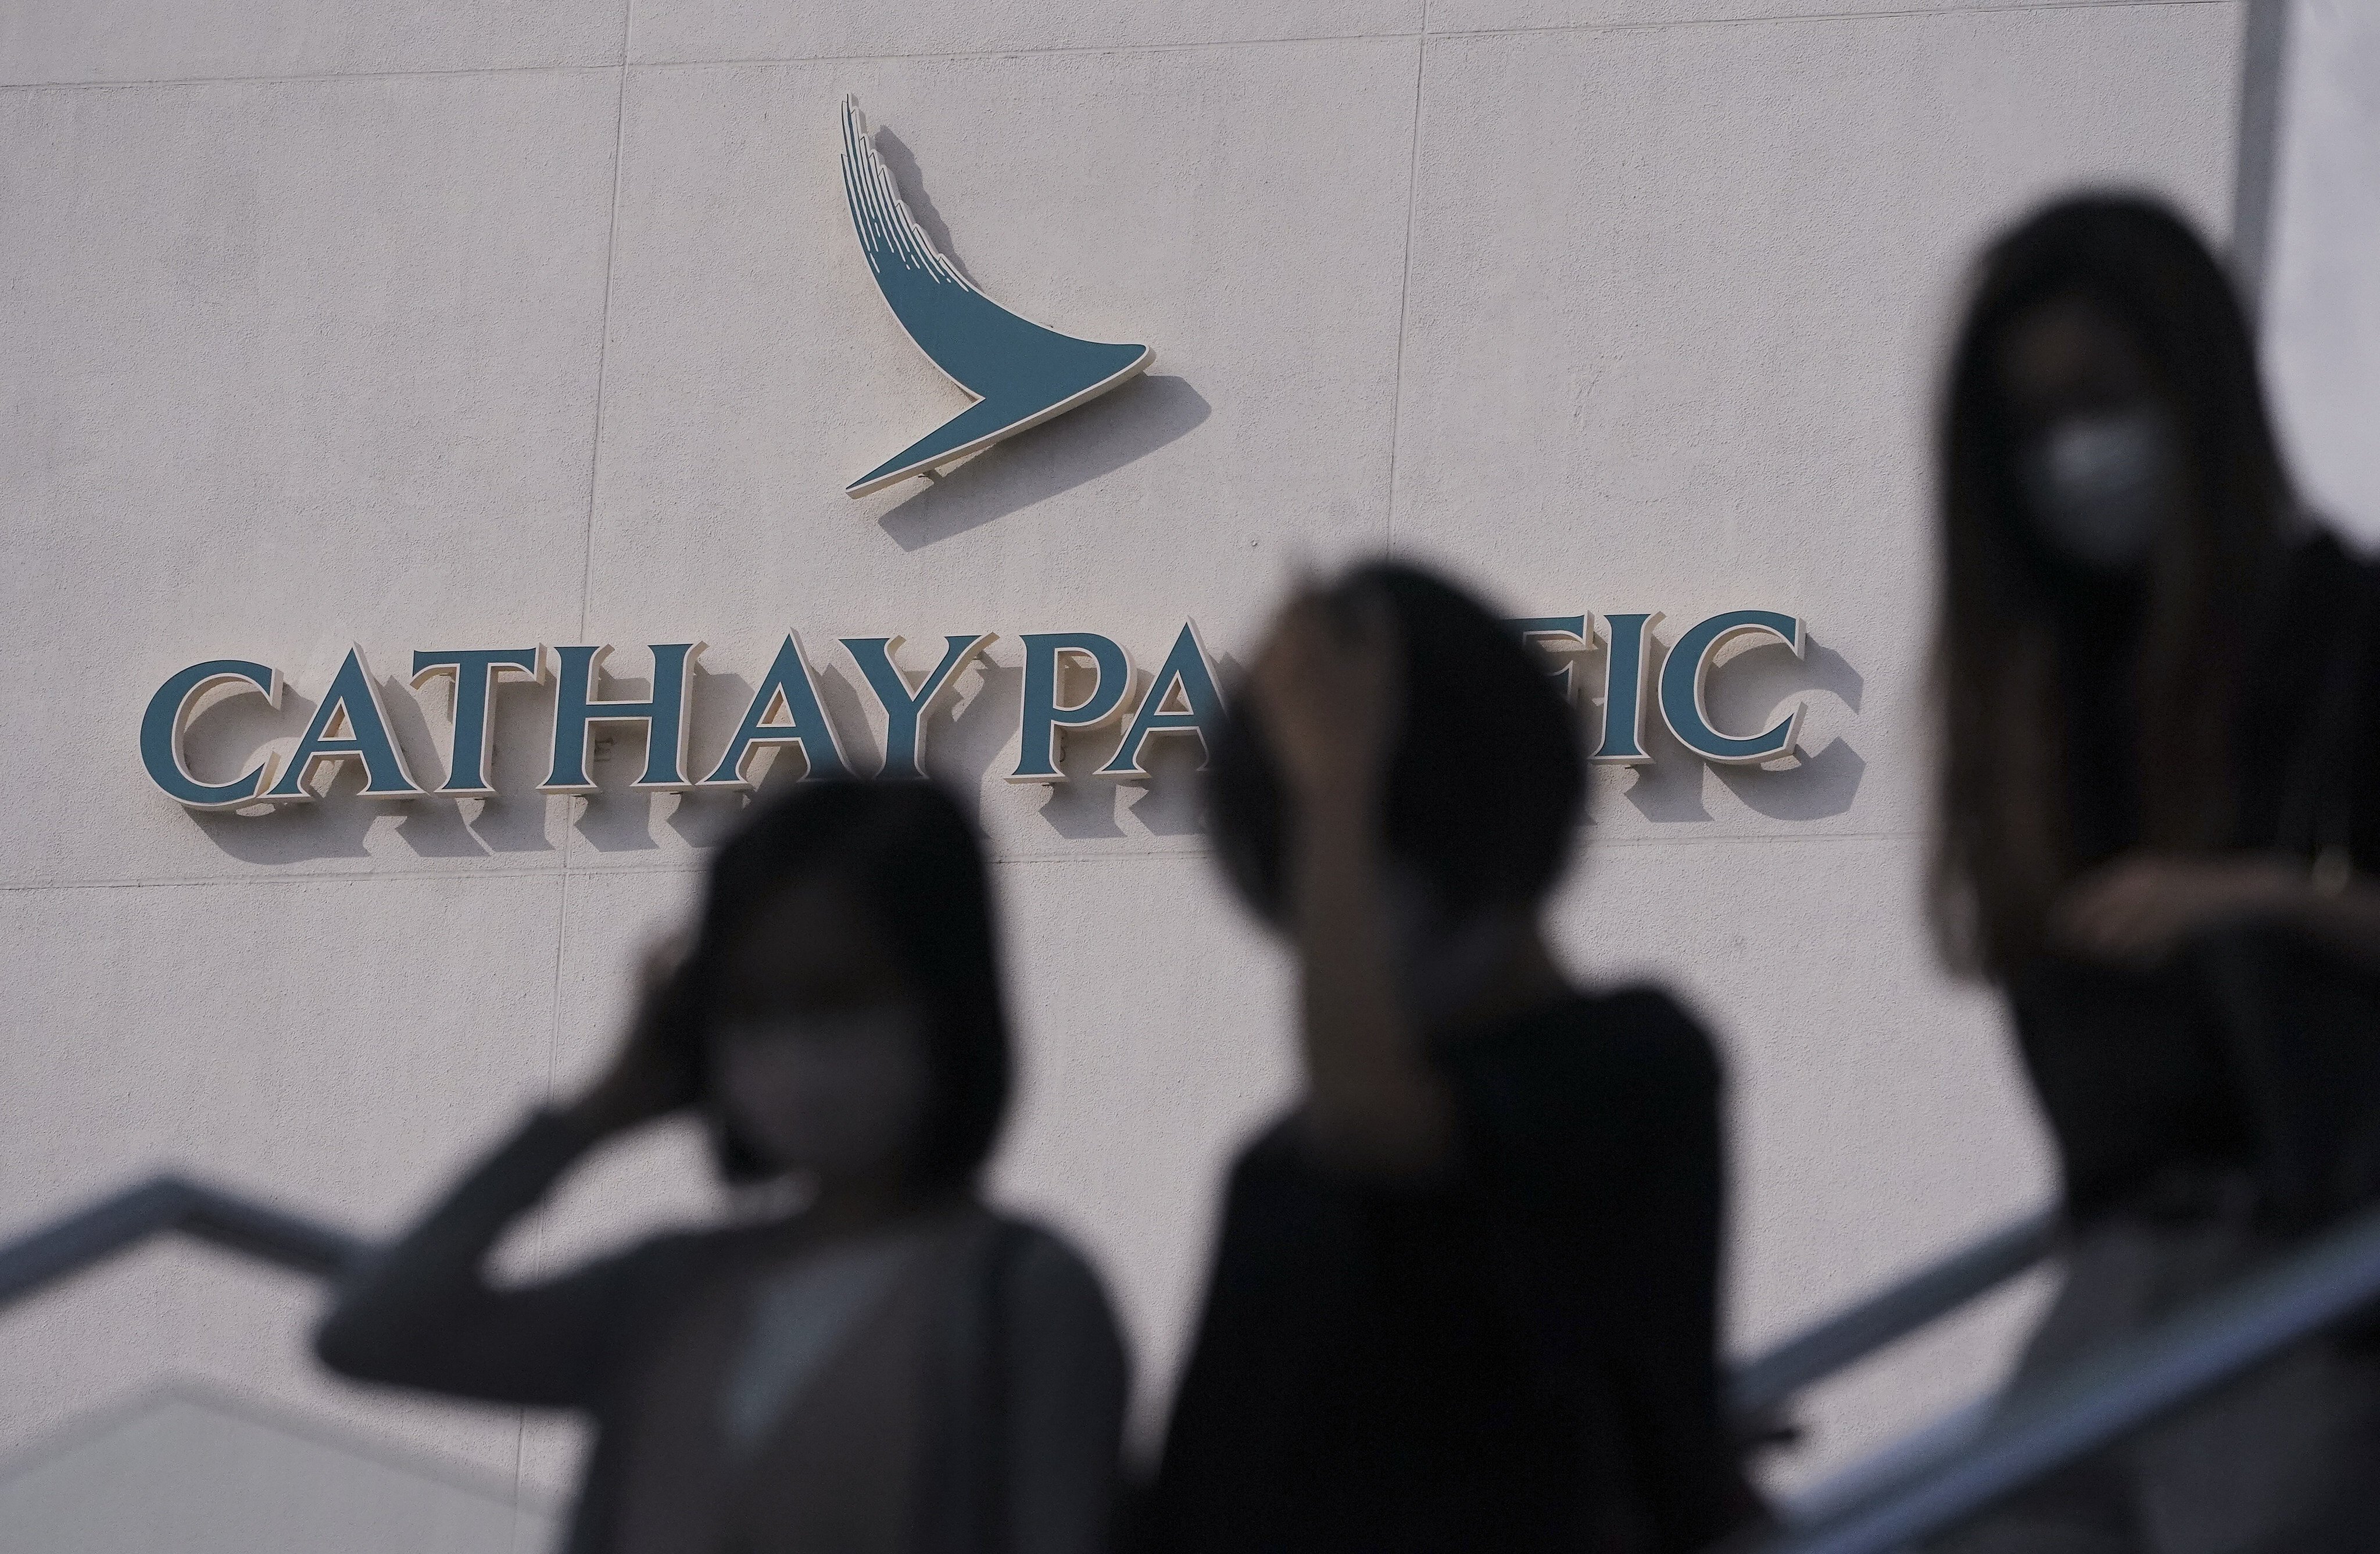 Police have arrested and charged two ex-Cathay staffers for allegedly violating the city’s anti-pandemic regulations. Photo: Felix Wong